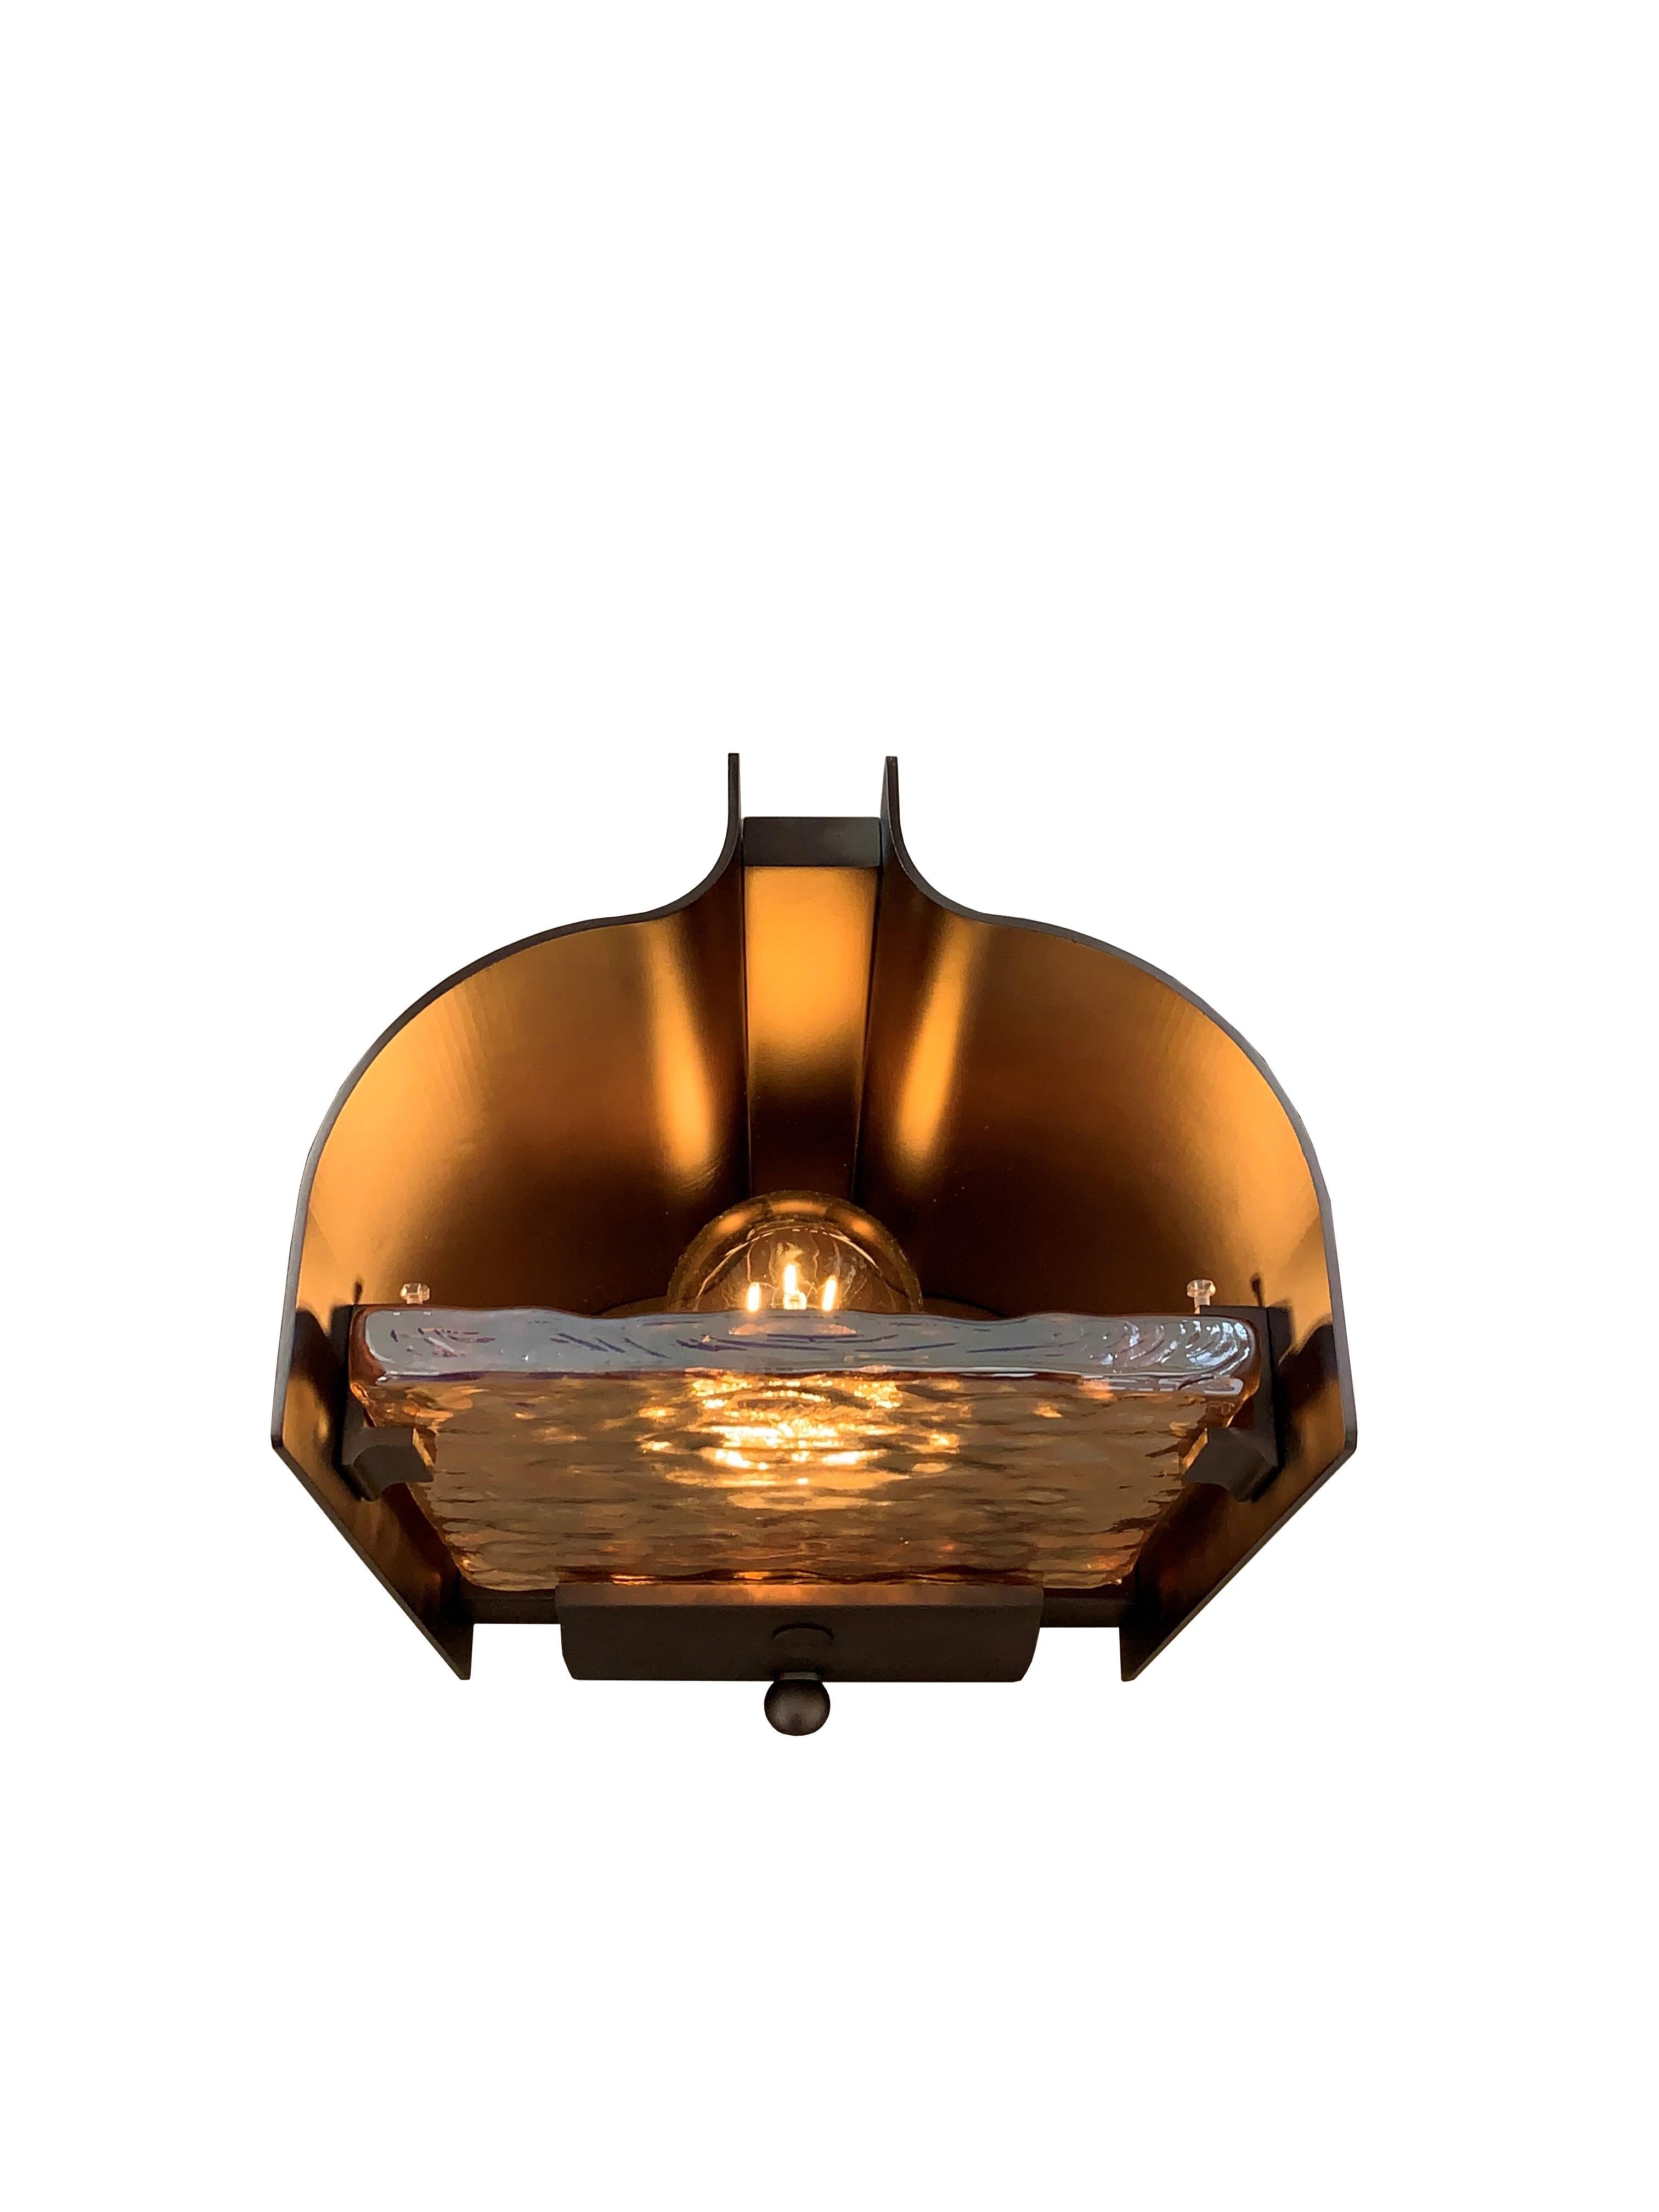 Other plugs are available by request.

Description: Ripple glass bedside table lamp
Color: Bronze
Size: 23 x 17 x 34H cm
Material: Bronze and glass
Collection: Ripple
Plug: UK Plug
Voltage: 220